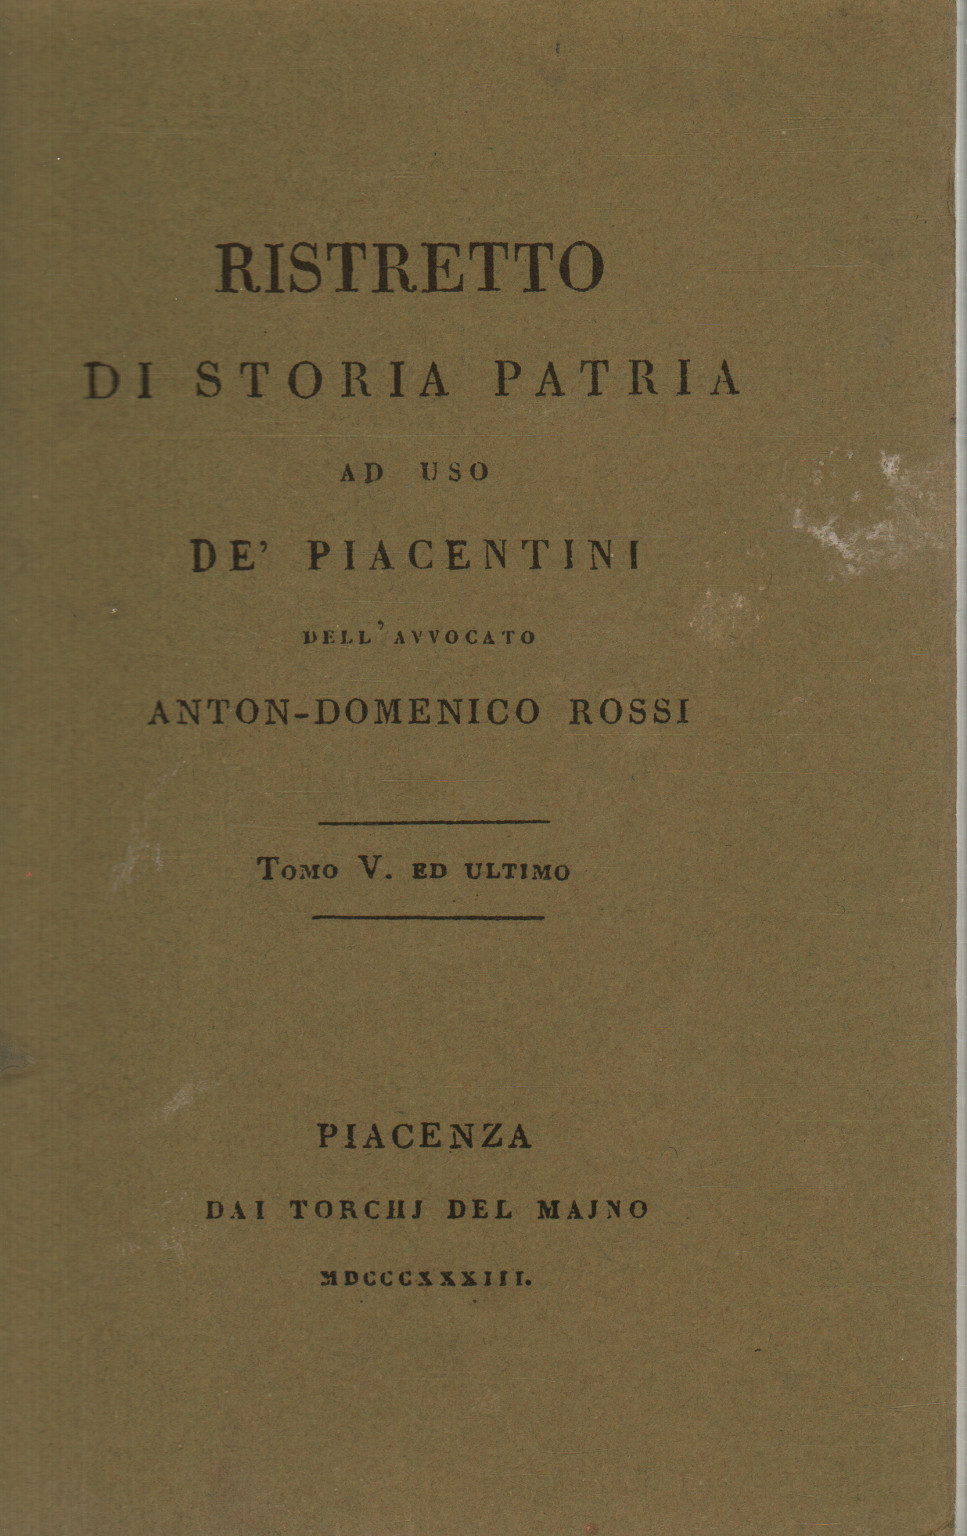 Ristretto of homeland history for use by Piacentines., Anton-Domenico Rossi